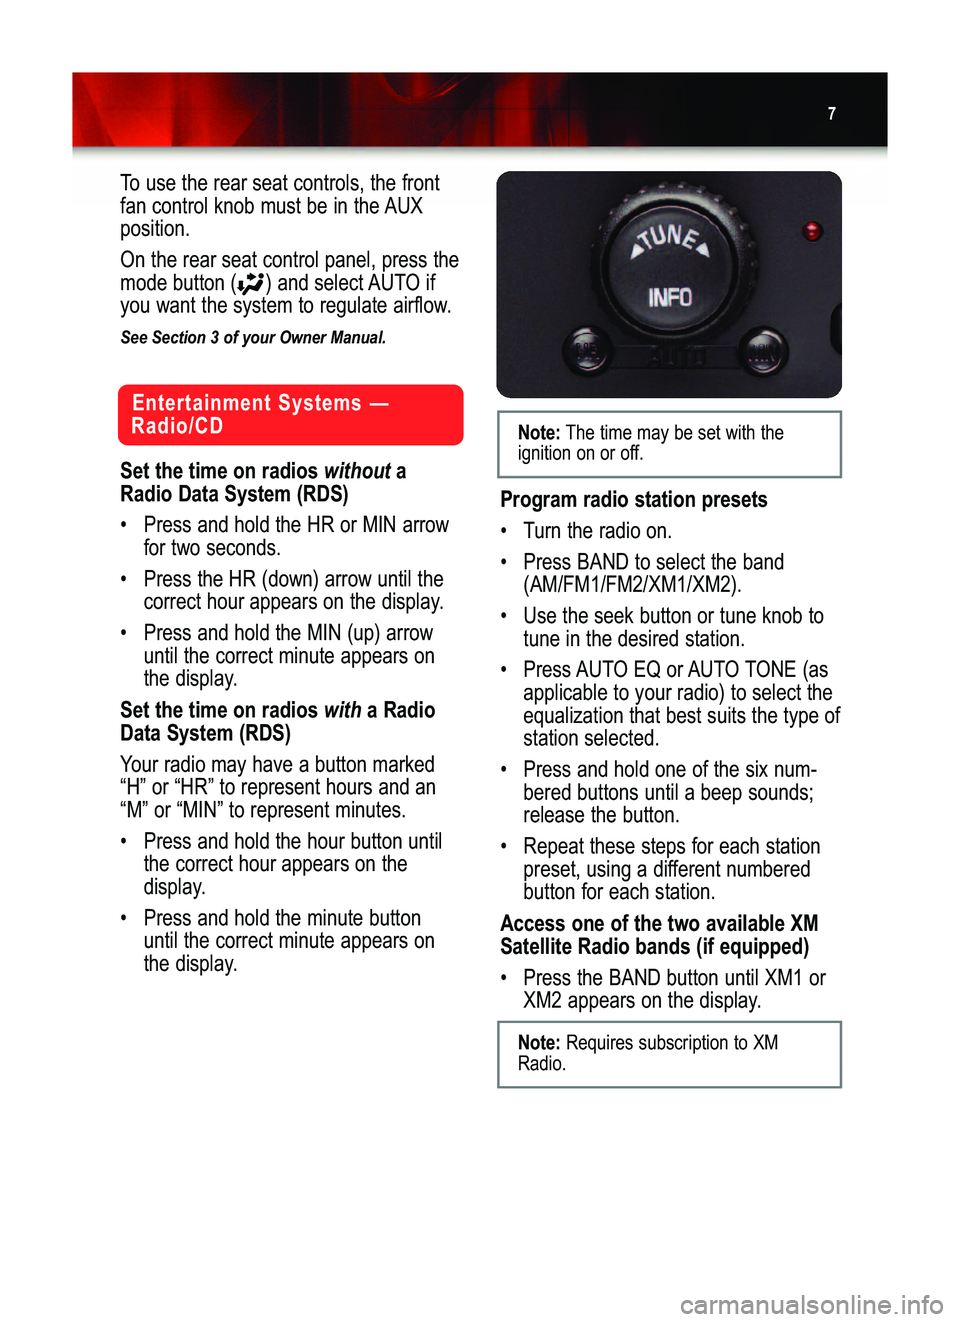 GMC YUKON 2006  Get To Know Guide 7
Entertainment Systems —
Radio/CD
Set the time on radios 
withouta
Radio Data System (RDS)
• Press and hold the HR or MIN arrow
for two seconds.
• Press the HR (down) arrow until the
correct ho